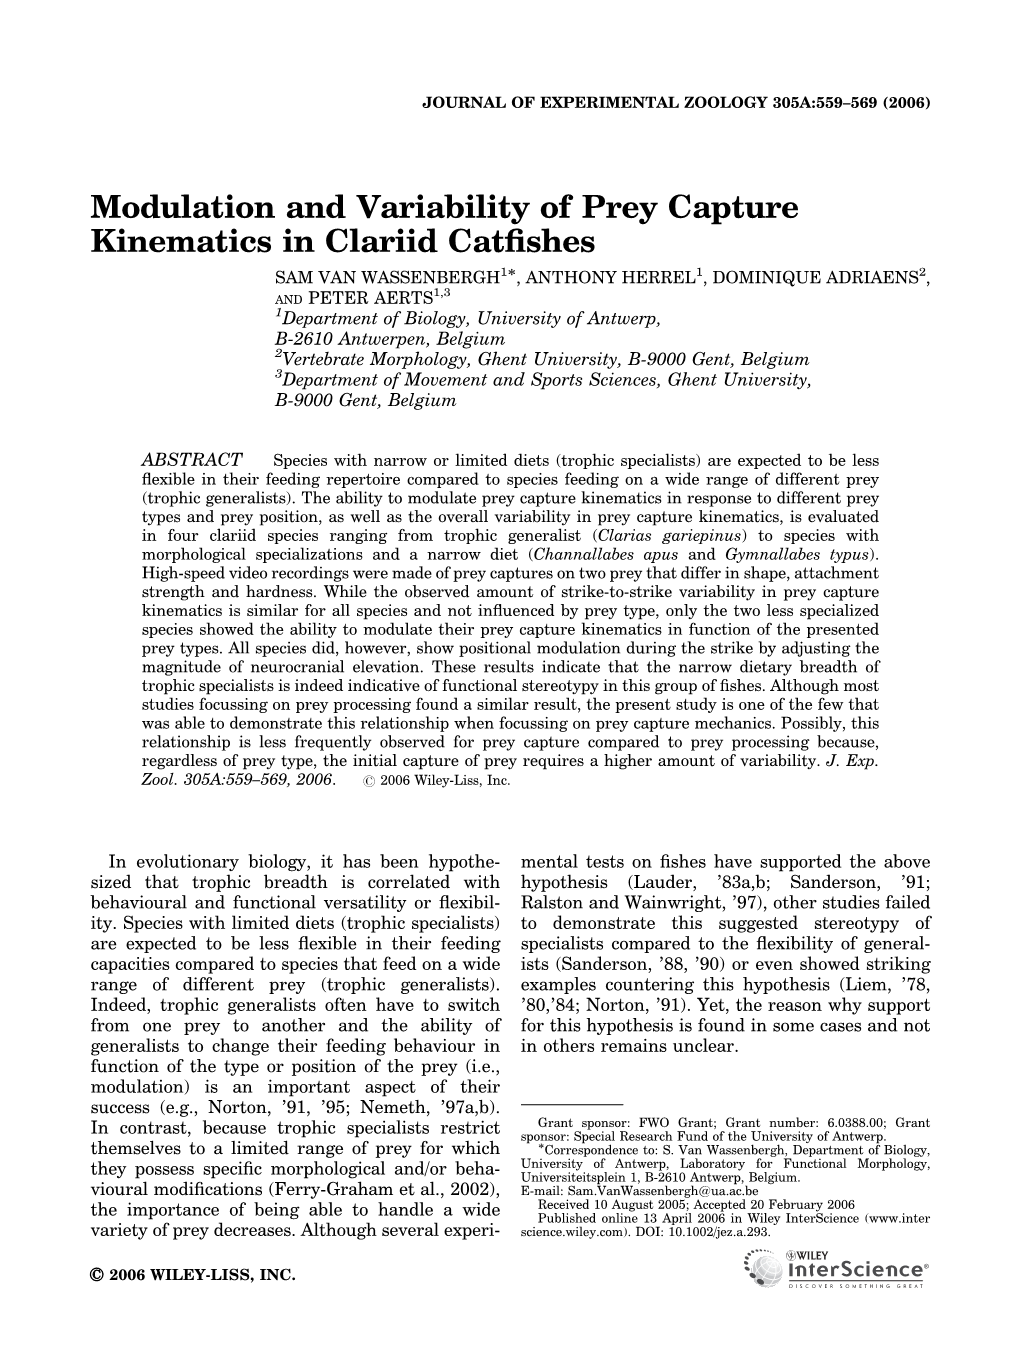 Modulation and Variability of Prey Capture Kinematics in Clariid Catfishes